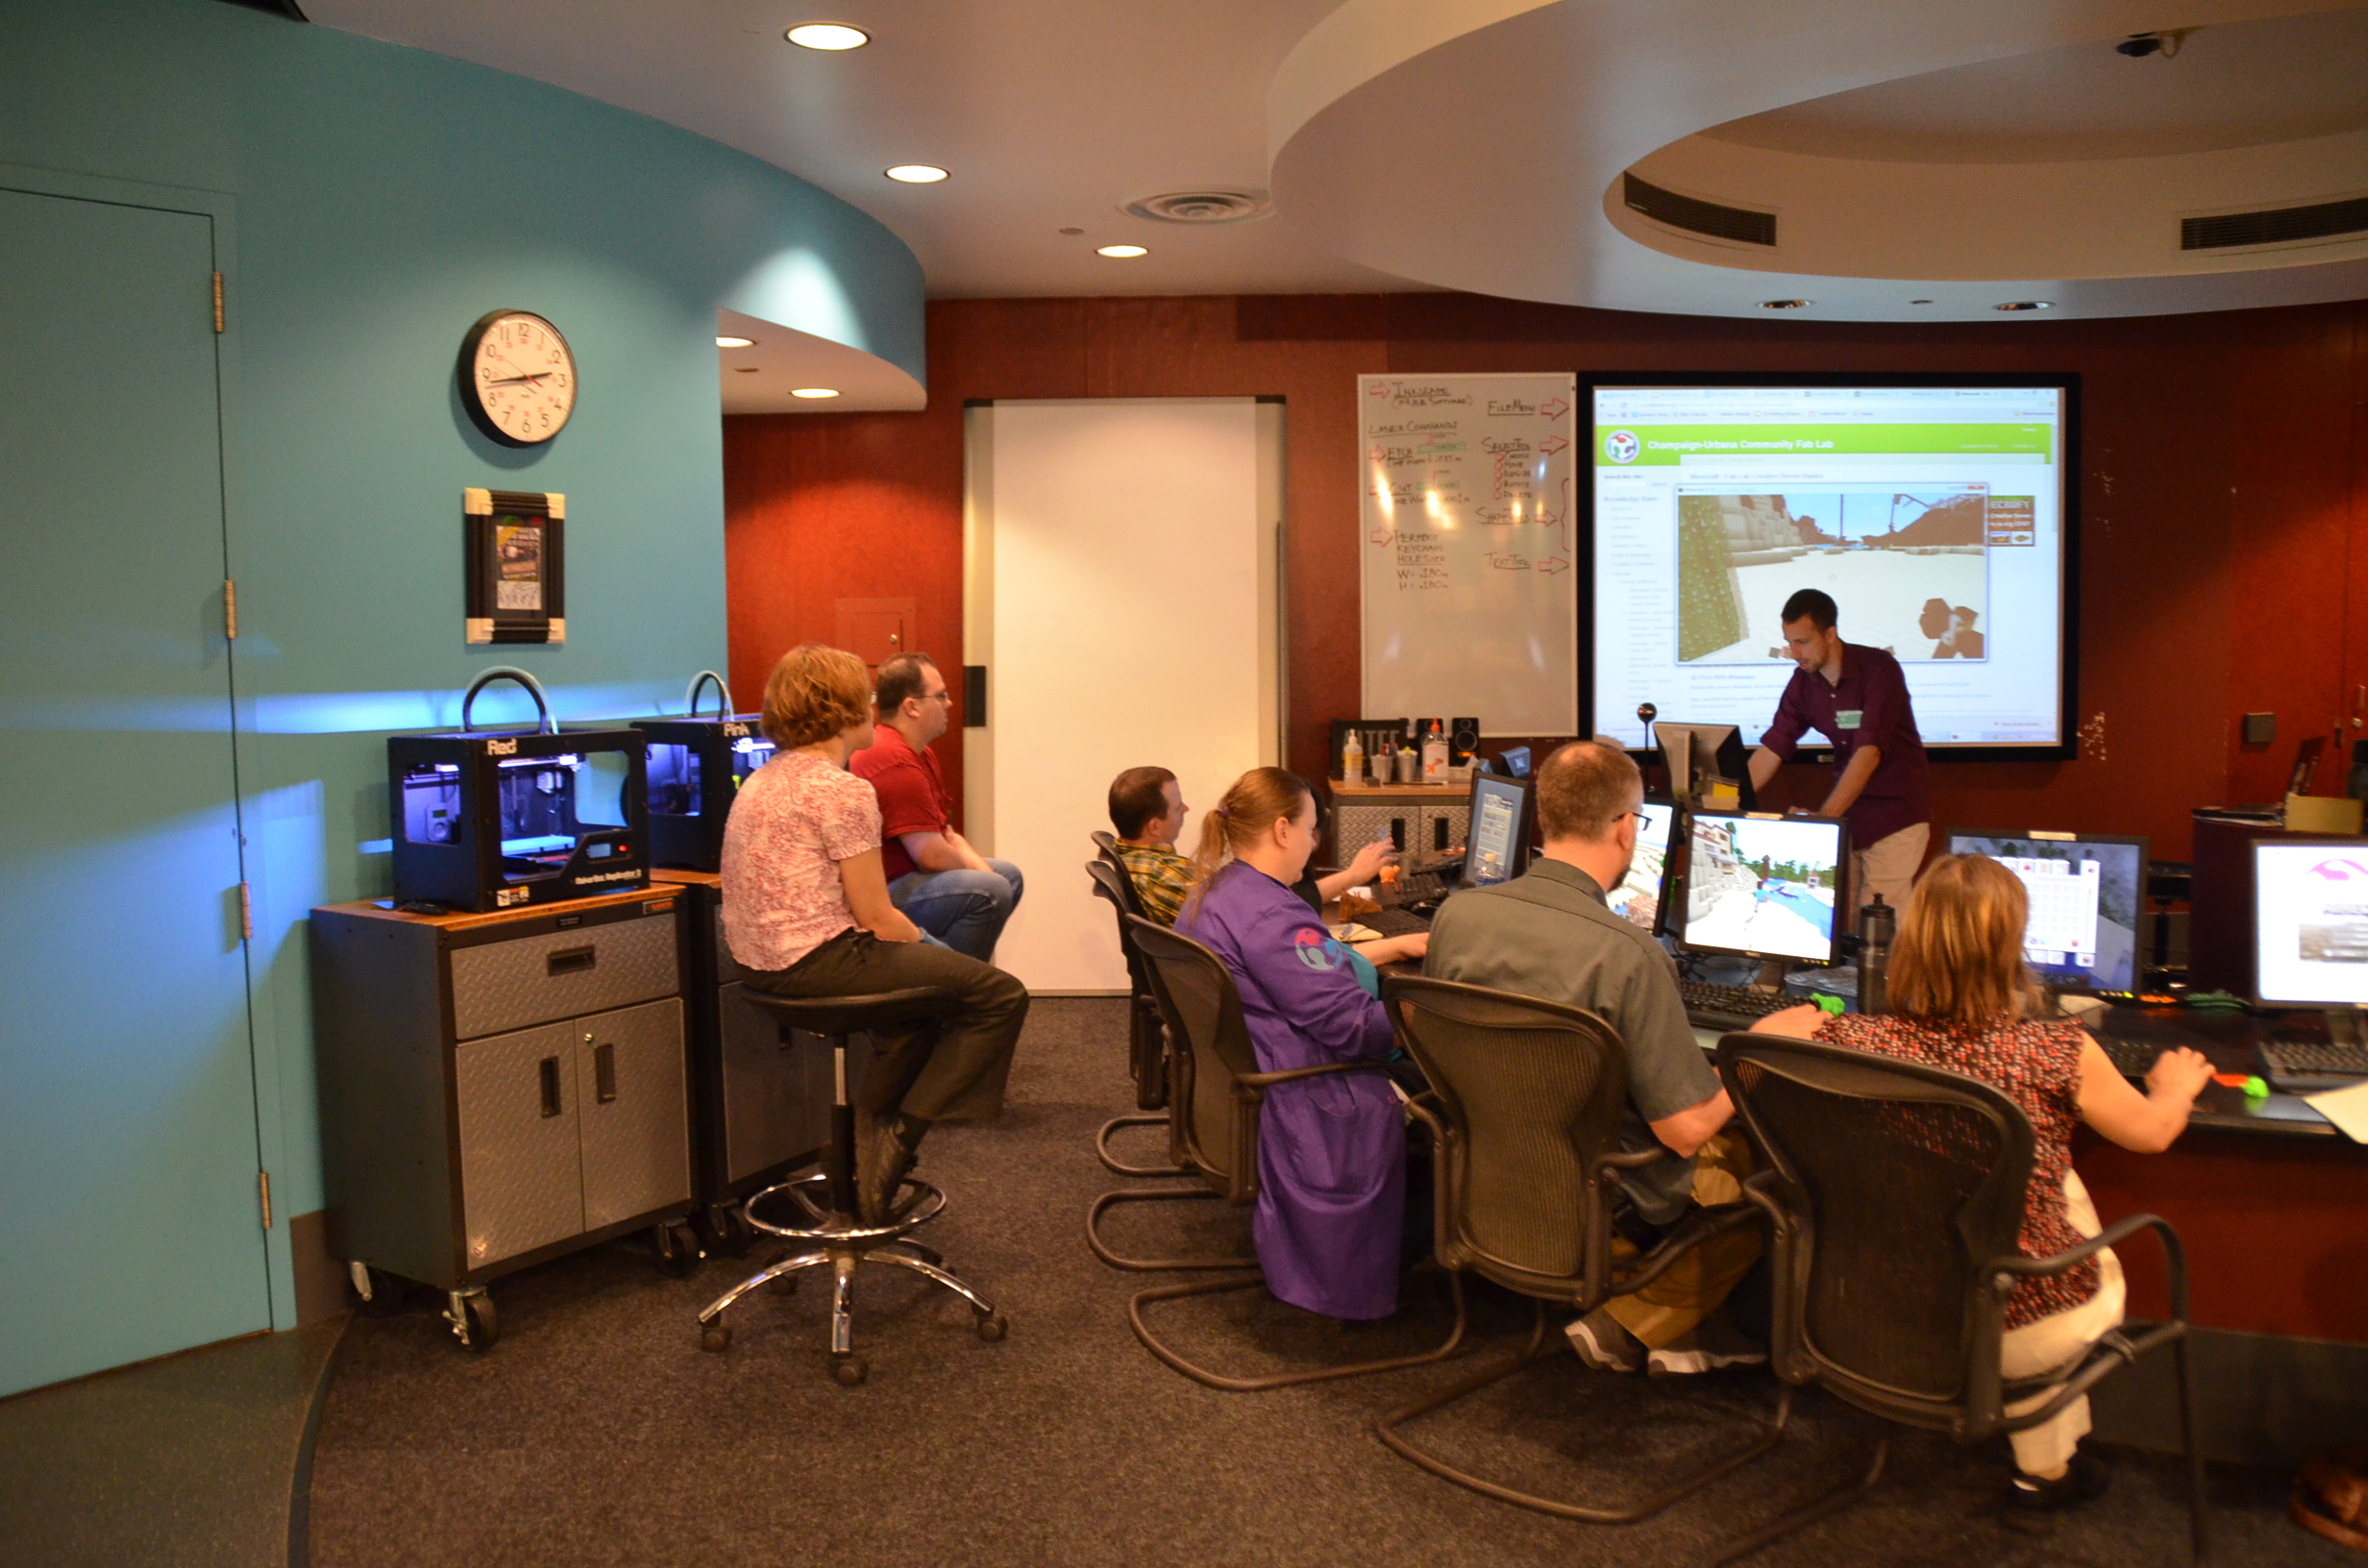 A "Shareout" in 2014 with our sister Fab Lab at the Museum of Science and Industry. We did cross training regularly over the years, this is me sharing using Minecraft for 3D modeling, scanning and printing.